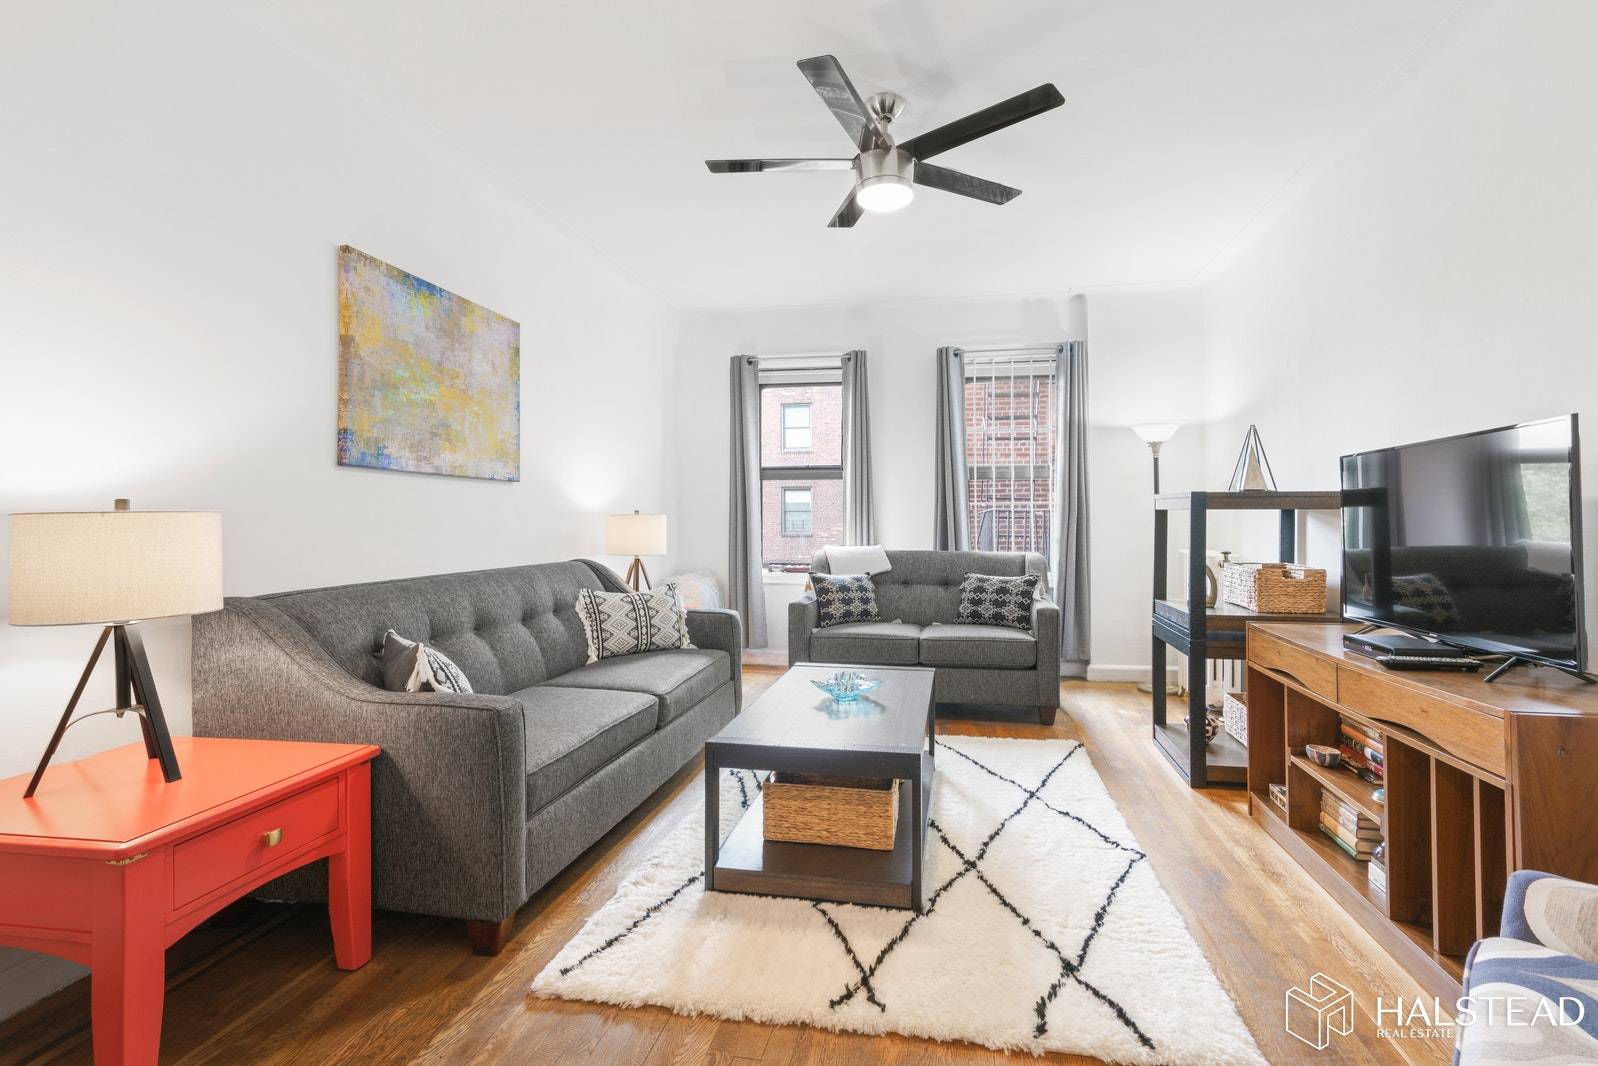 Space and warmth can be yours in the historic Amalgamated Co op.